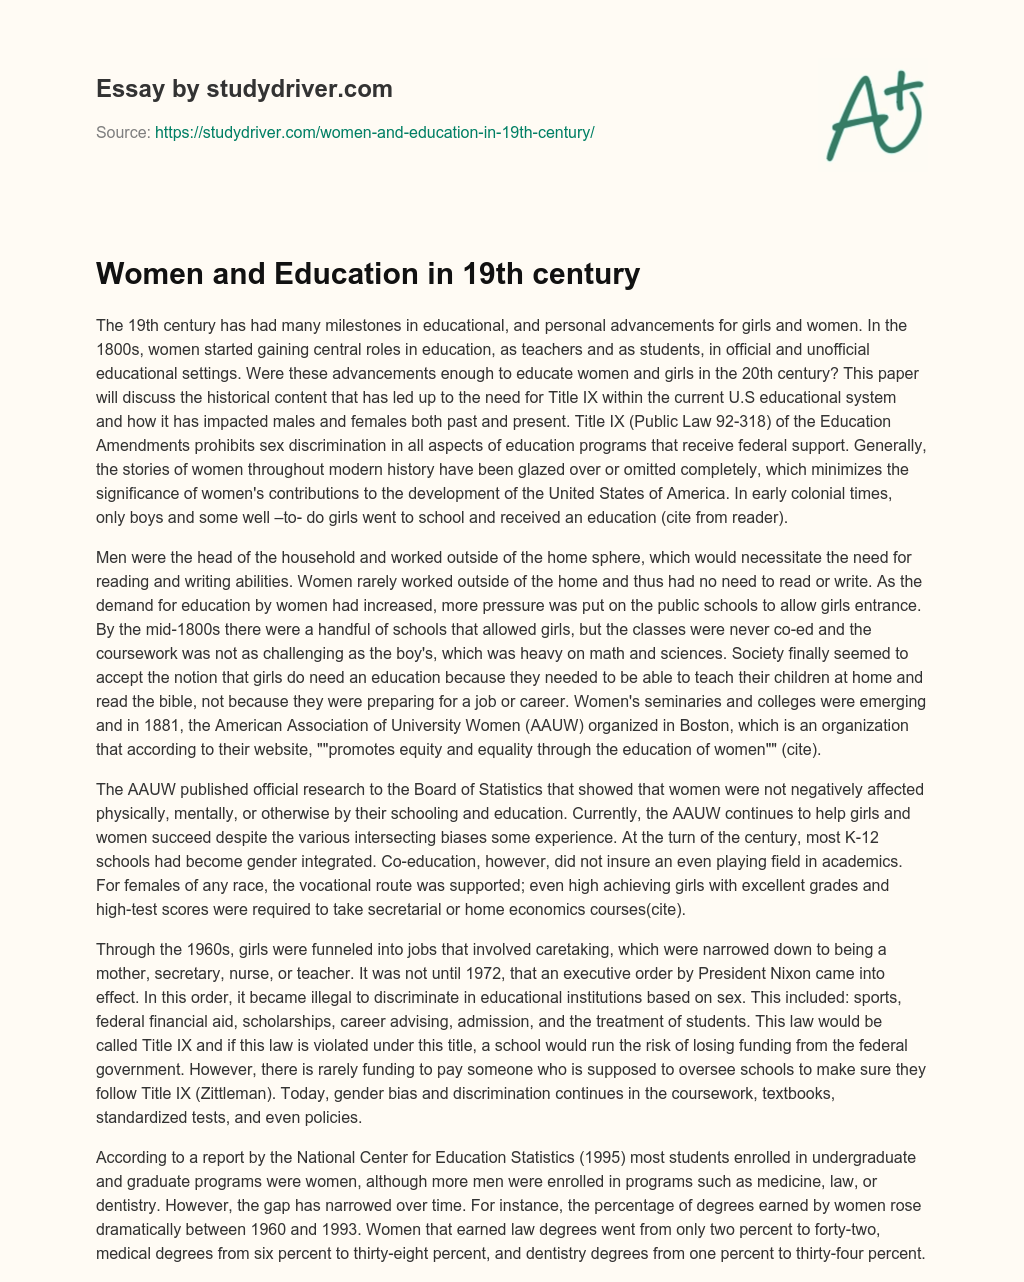 Women and Education in 19th Century essay